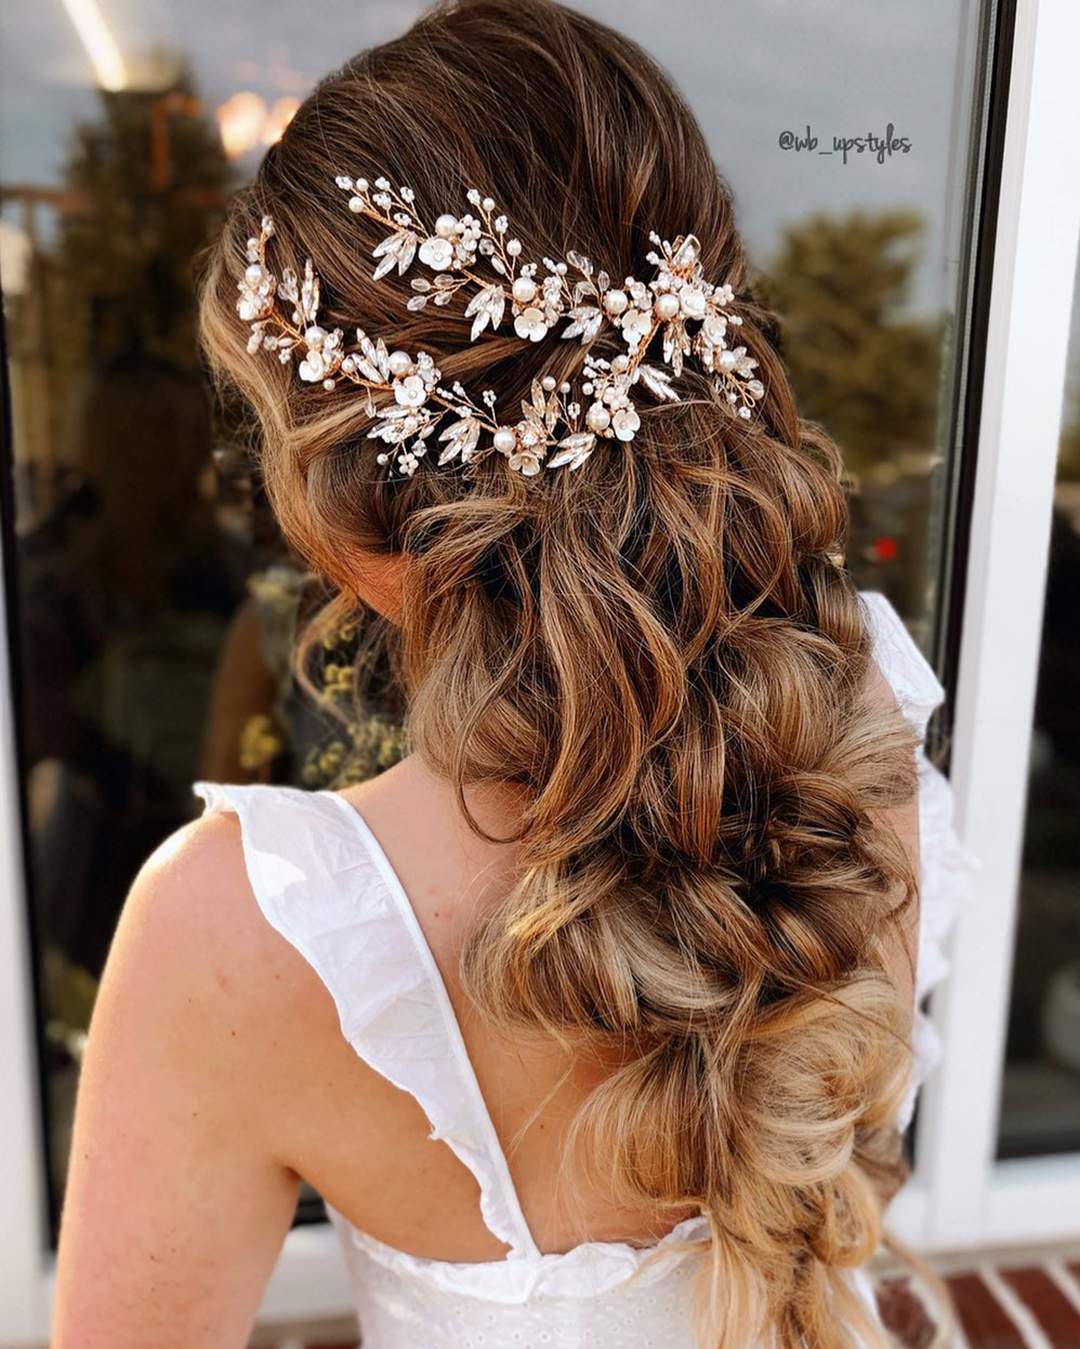 summer wedding hairstyles curly for bride wb_upstyles